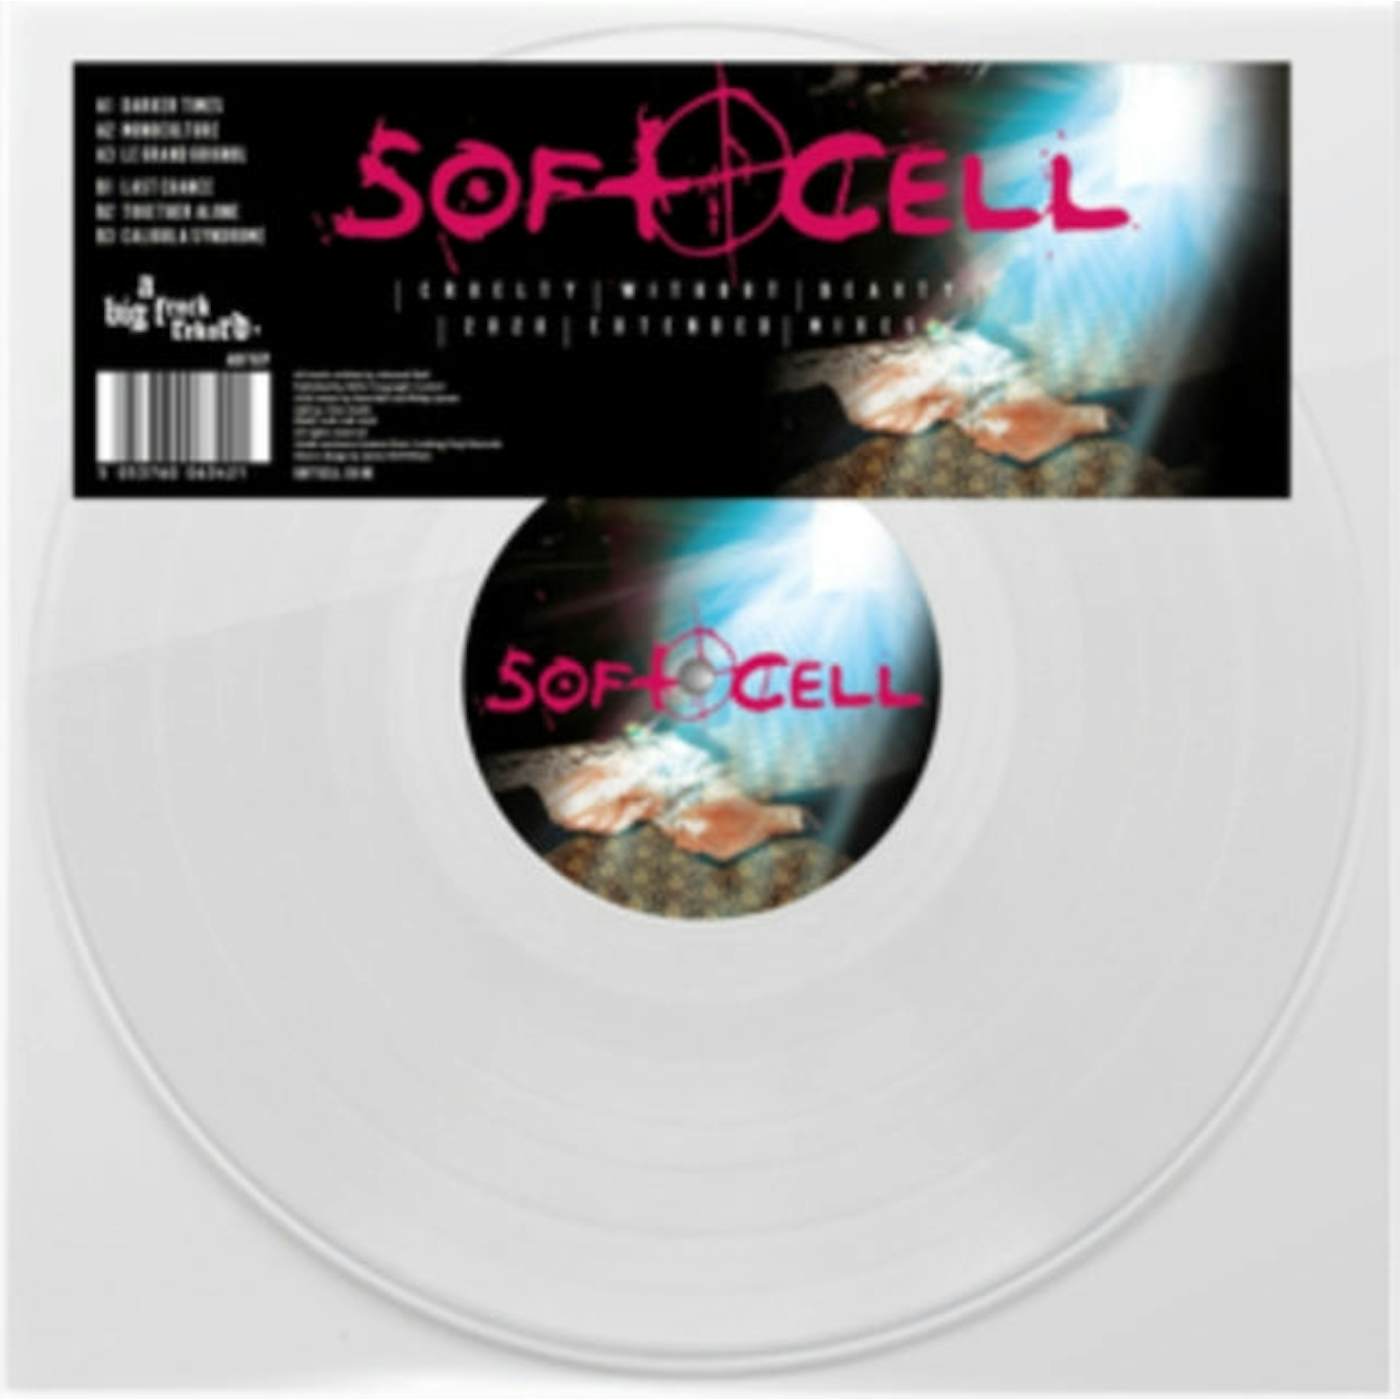 Soft Cell LP Vinyl Record - Cruelty Without Beauty Remixes Ep (White Vinyl)